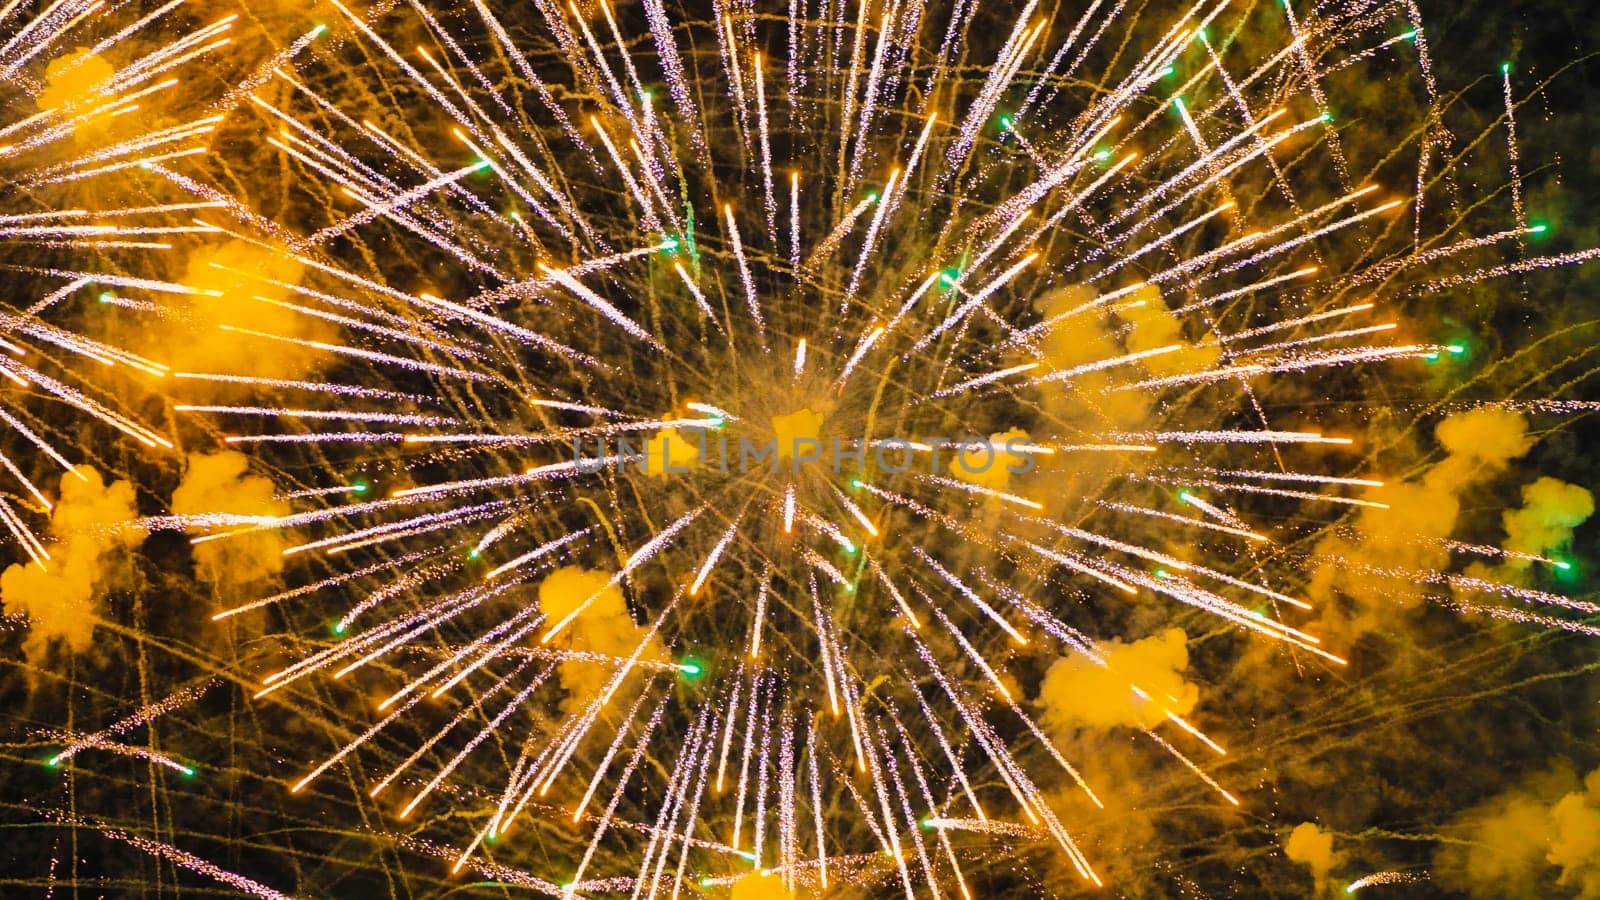 A colourful explosion of yellow fireworks in the night sky. by DovidPro